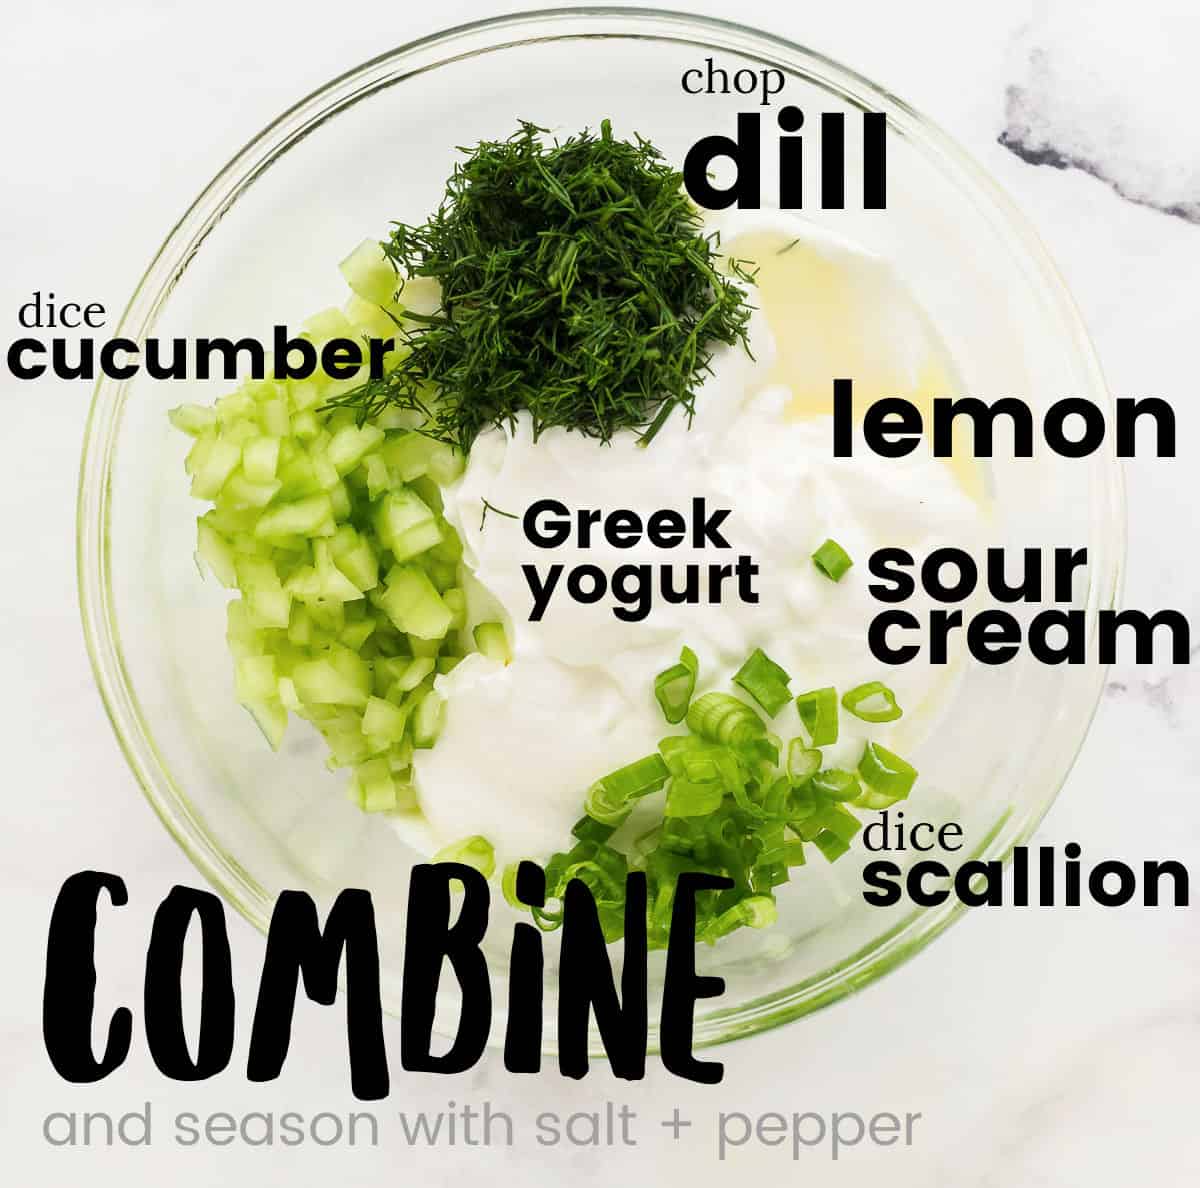 combining all of the prepared ingredients in large bowl to make an easy Cucumber Dip